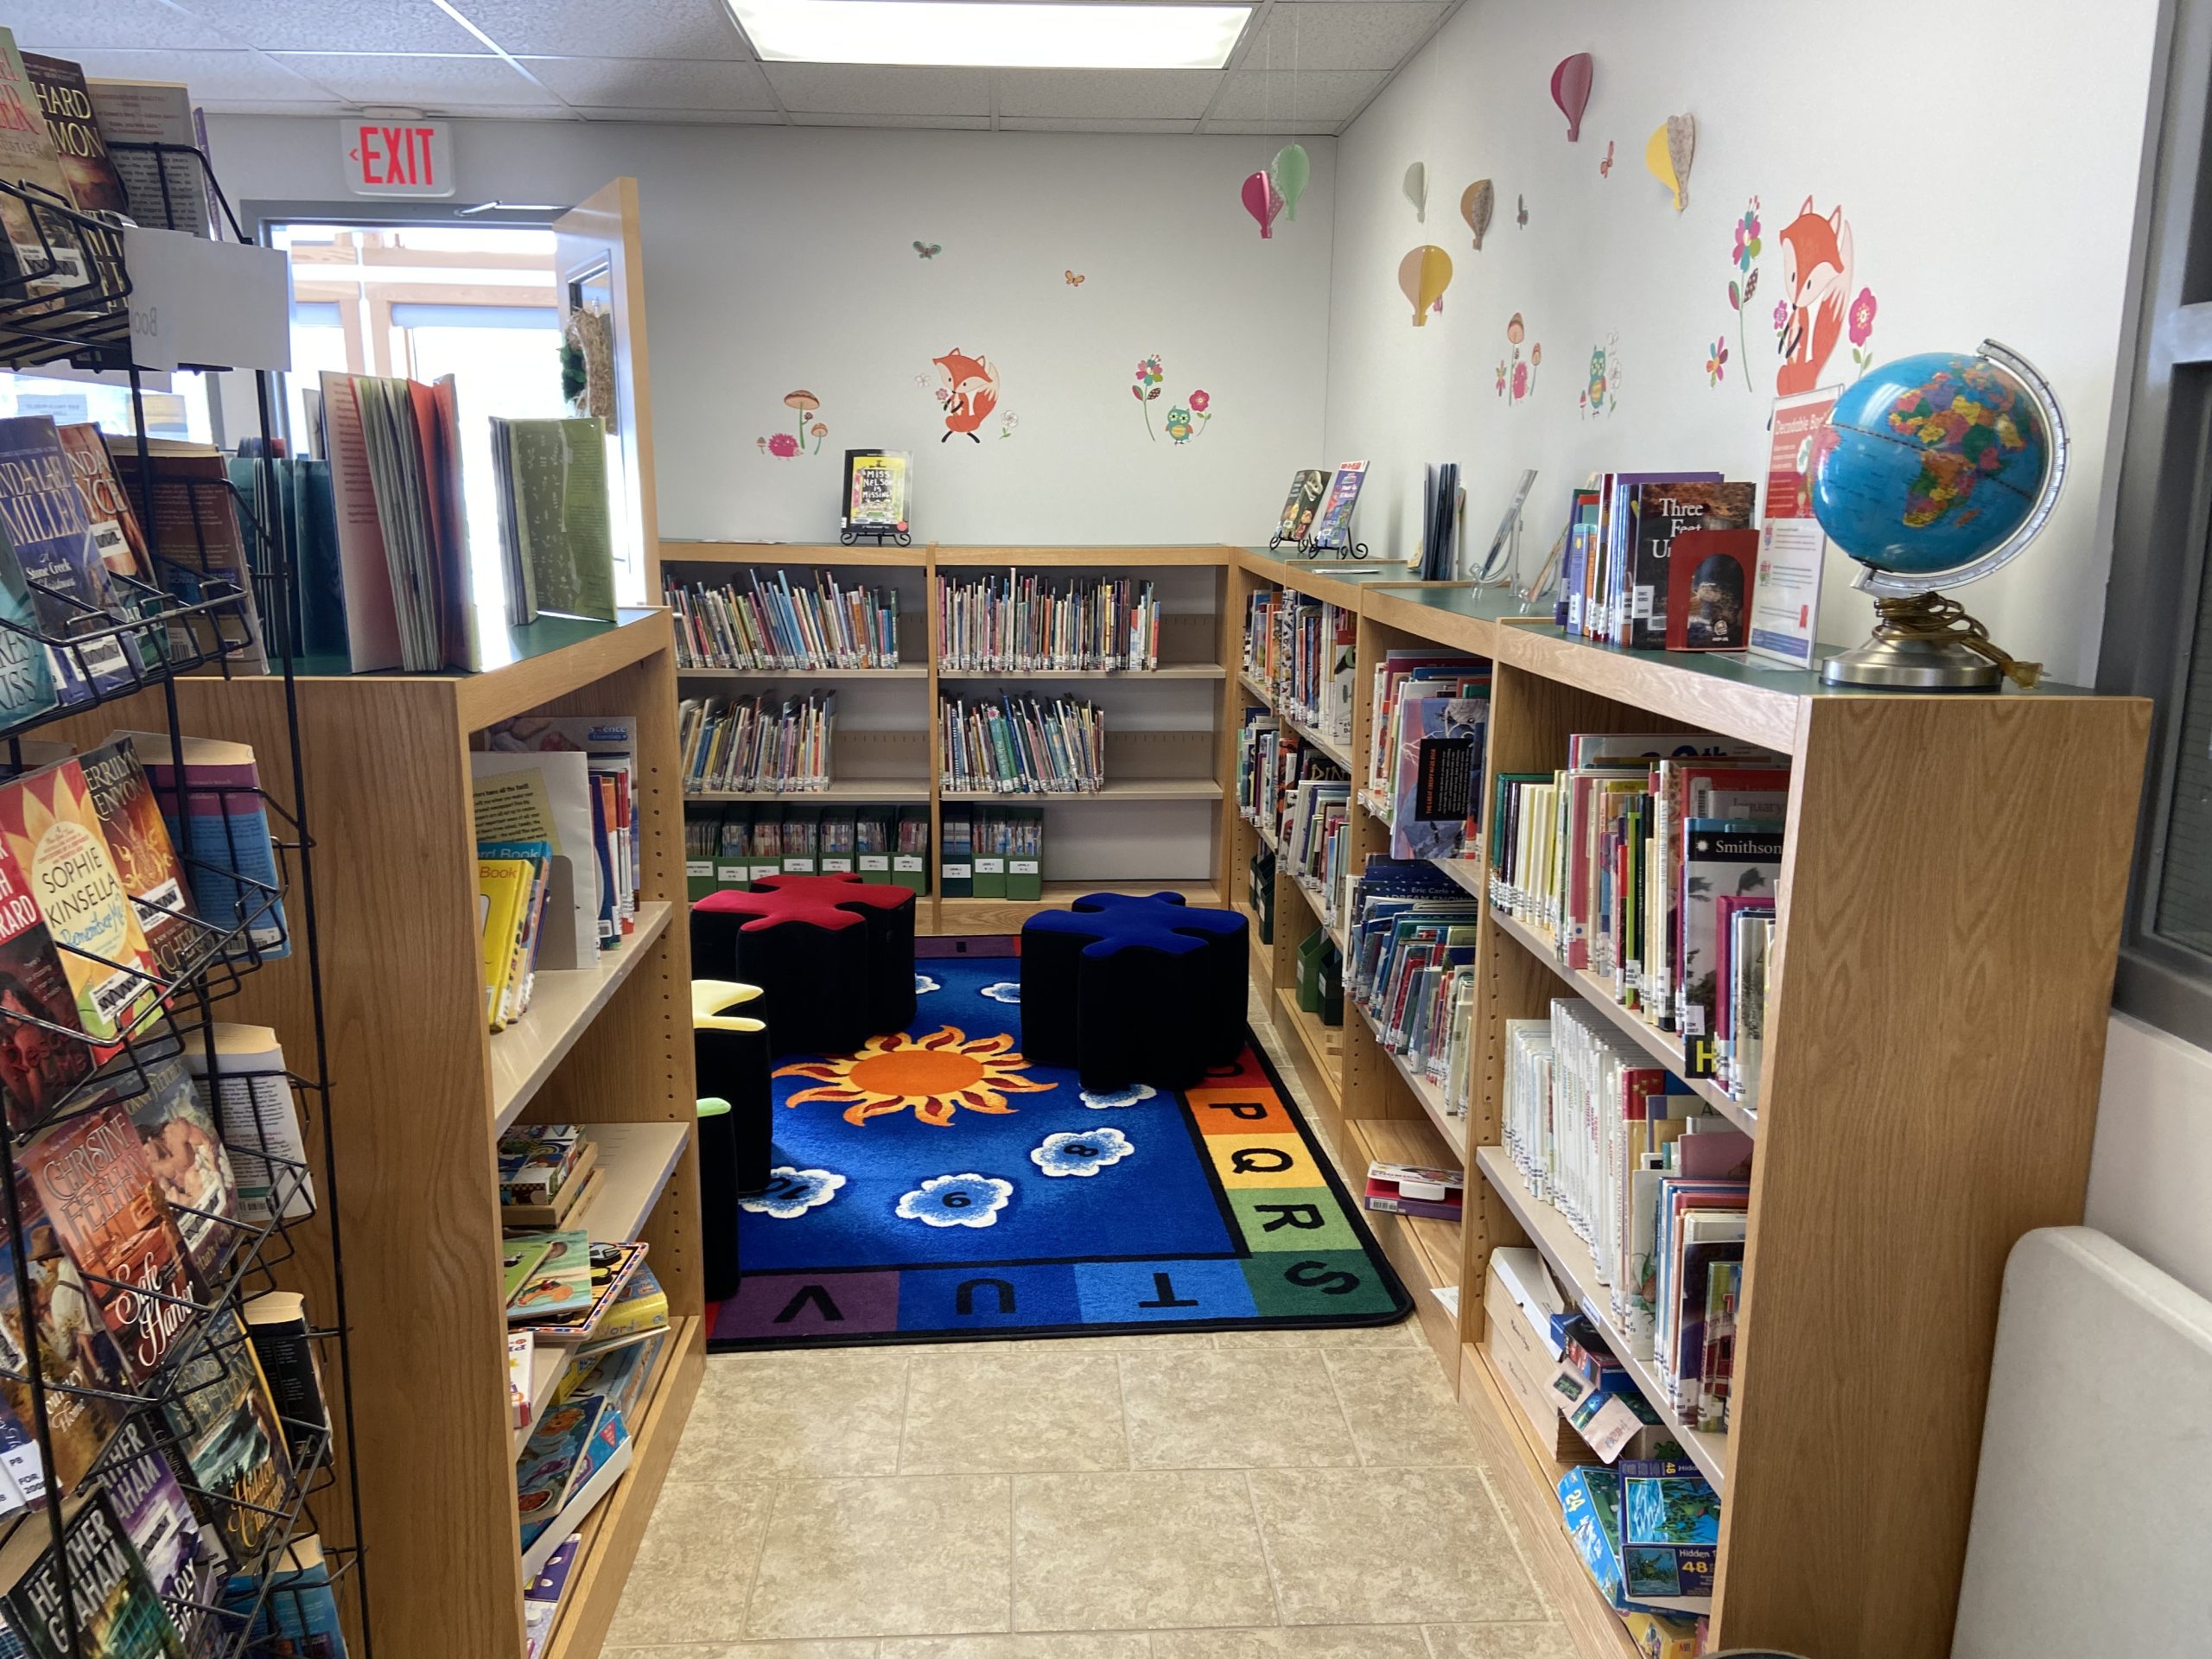 A view of the kid's corner within the library. It is a small area, walled off by bookshelves filled with various children's books, with a carpet in the middle and puzzle-piece shaped chairs. There are decorations placed on the walls and atop the bookshelves.